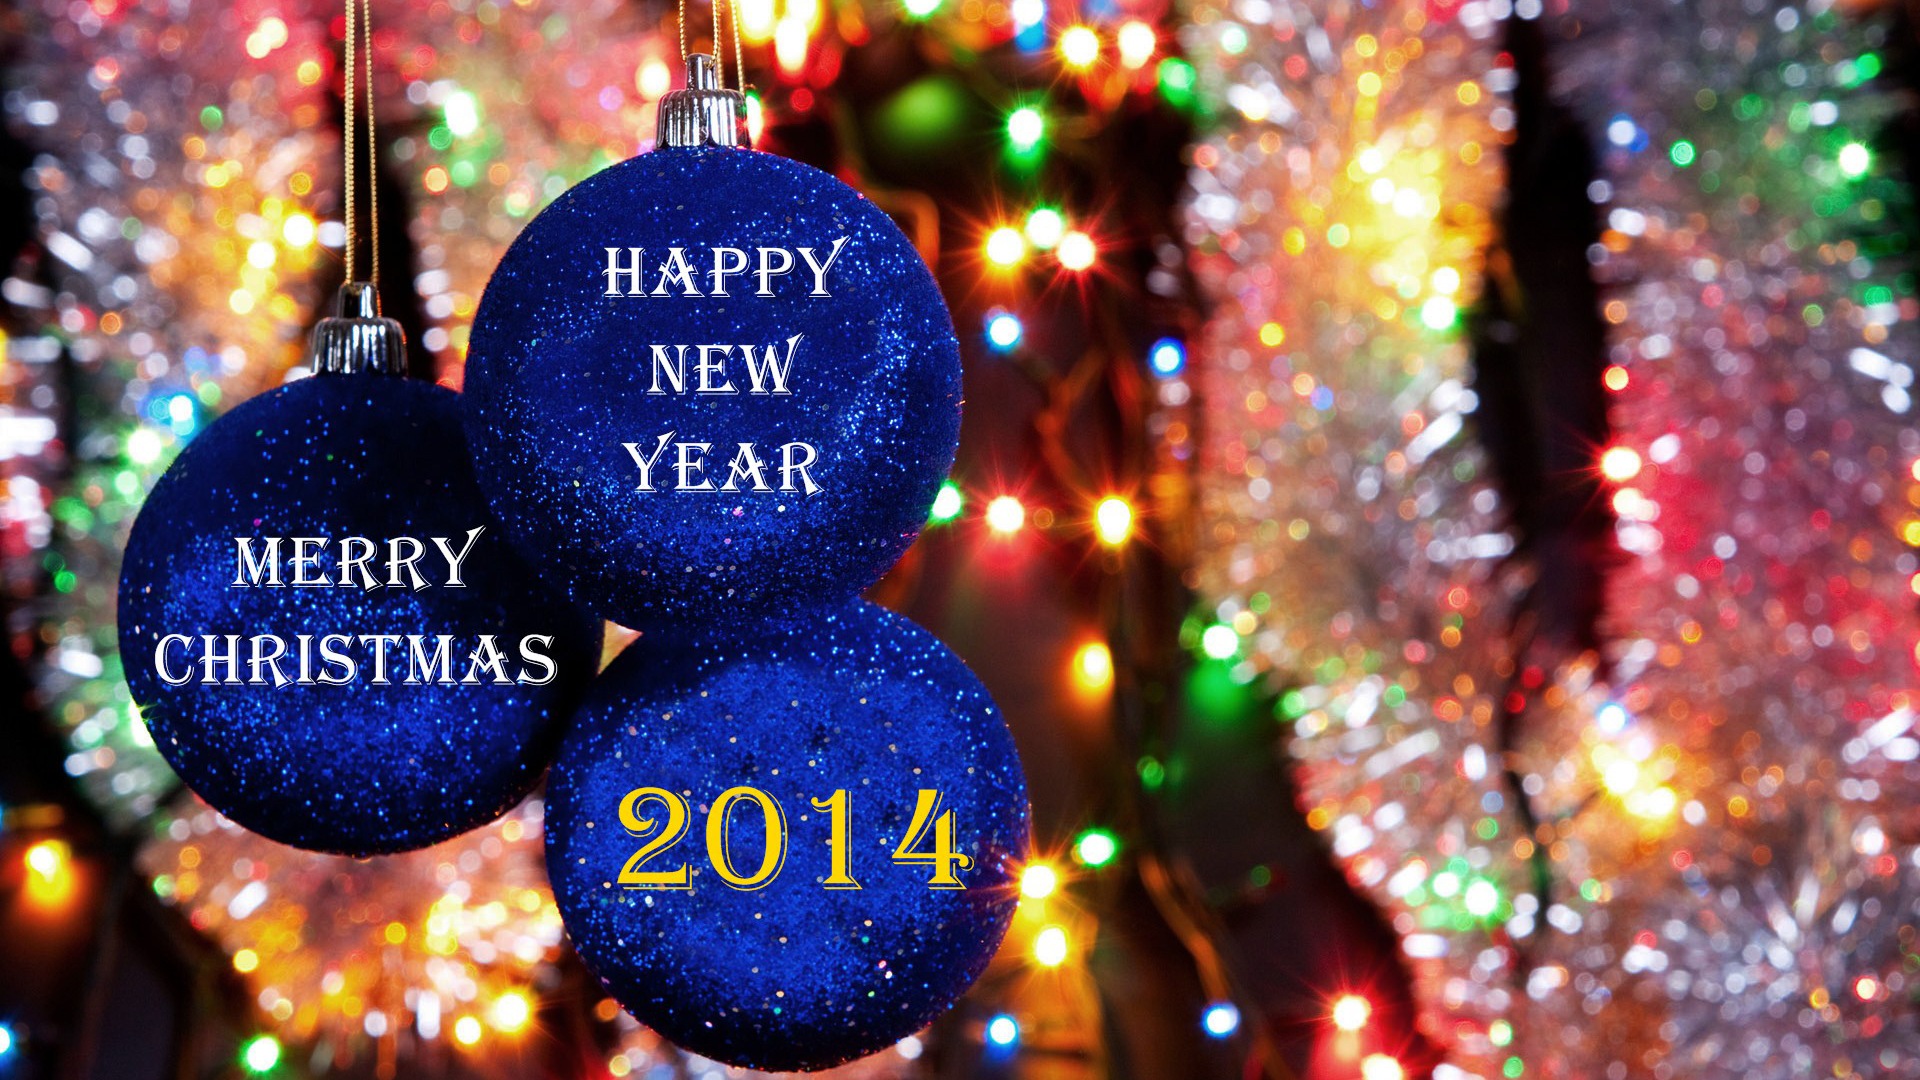 2014 New Year Theme HD Wallpapers (2) #6 - 1920x1080